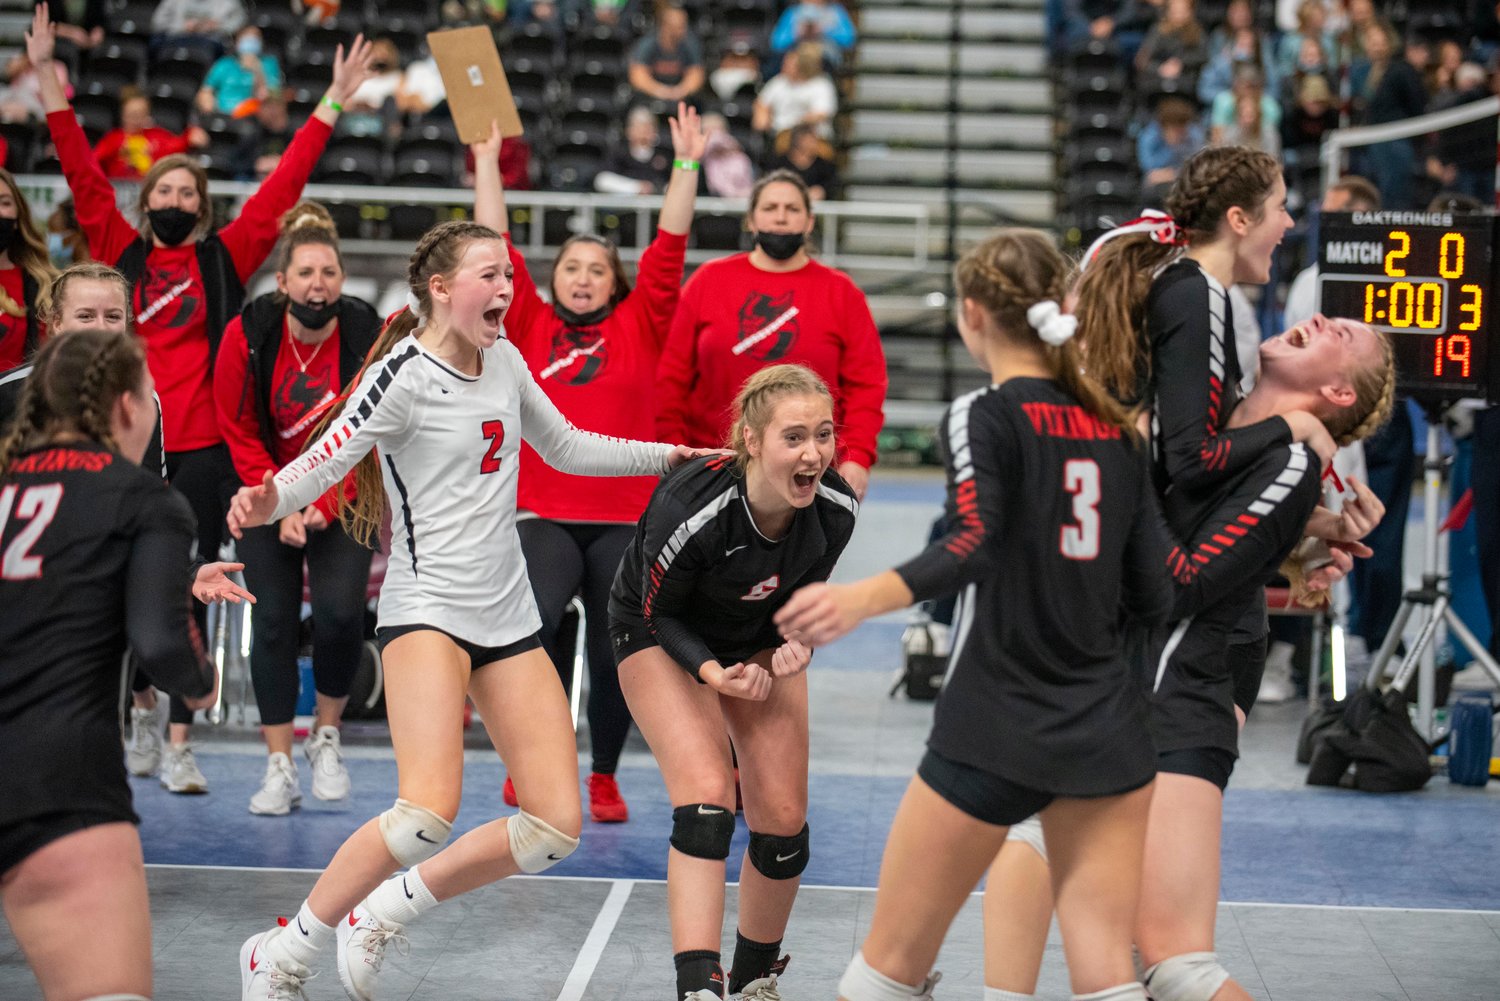 Mossyrock celebrates after sweeping St. John Endicott/LaCross in the 1B state semifinals Friday in Yakima.